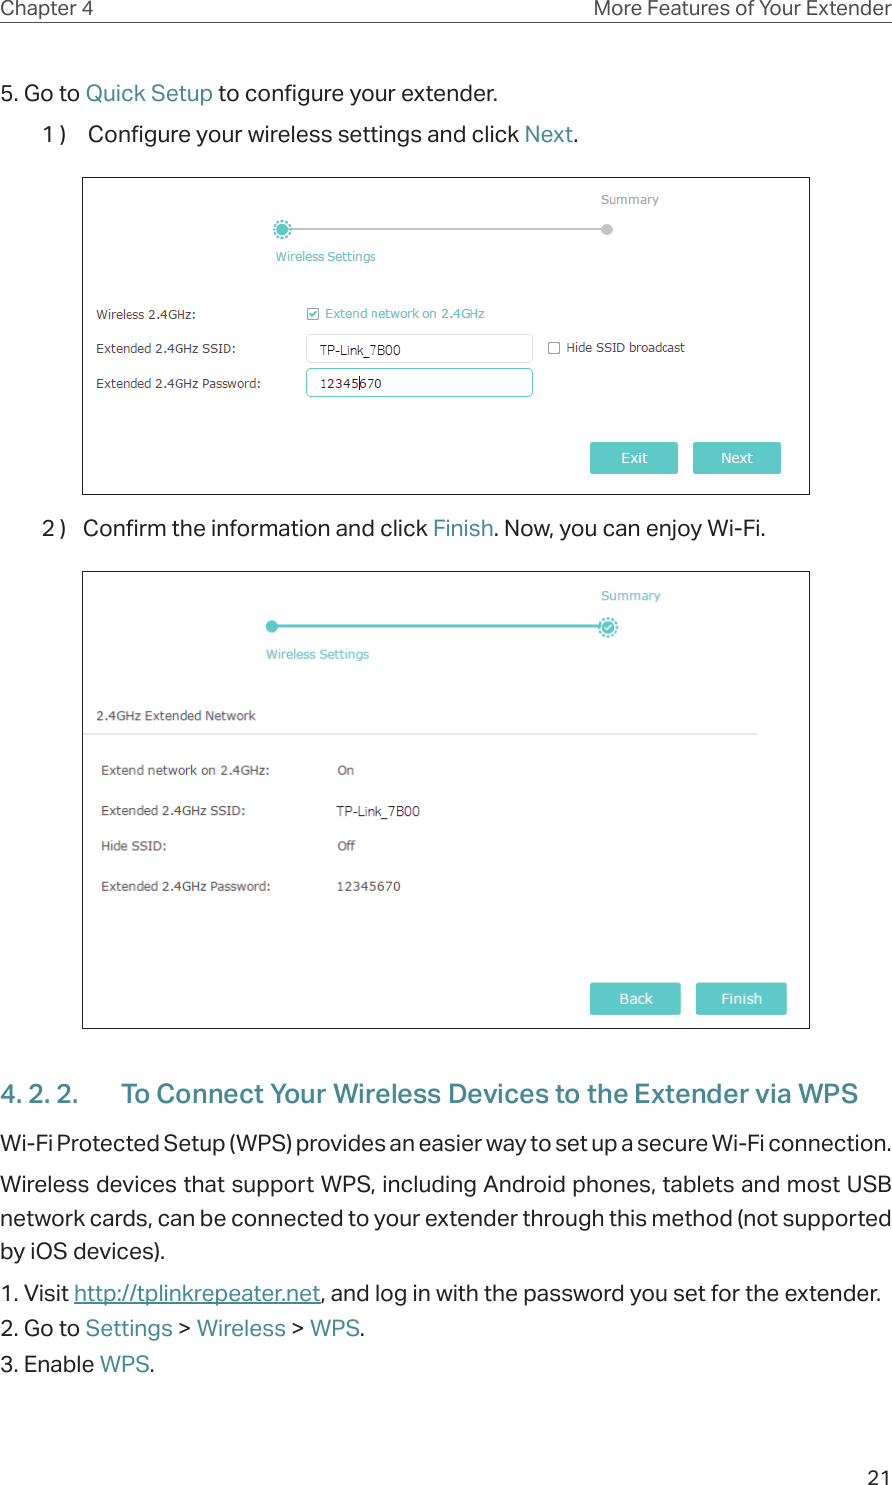 21Chapter 4 More Features of Your Extender5. Go to Quick Setup to configure your extender.1 )   Configure your wireless settings and click Next.  2 )  Confirm the information and click Finish. Now, you can enjoy Wi-Fi.4. 2. 2.  To Connect Your Wireless Devices to the Extender via WPSWi-Fi Protected Setup (WPS) provides an easier way to set up a secure Wi-Fi connection.Wireless devices that support WPS, including Android phones, tablets and most USB network cards, can be connected to your extender through this method (not supported by iOS devices).1. Visit http://tplinkrepeater.net, and log in with the password you set for the extender.2. Go to Settings &gt; Wireless &gt; WPS. 3. Enable WPS.